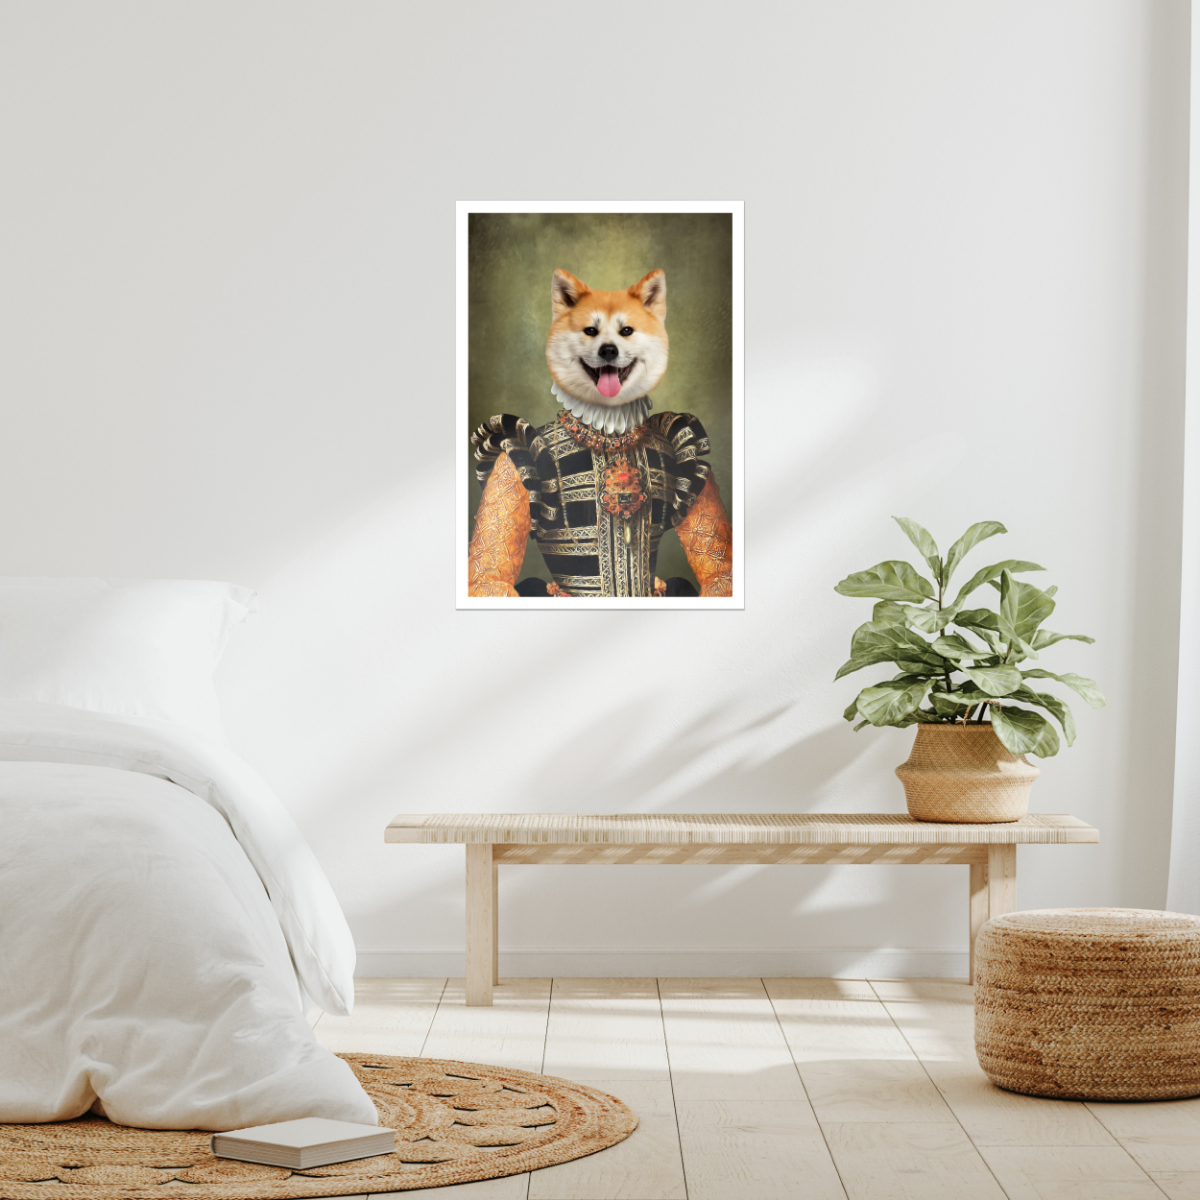 The Consort: Custom Pet Poster - Paw & Glory - #pet portraits# - #dog portraits# - #pet portraits uk#Paw & Glory, paw and glory, dog portrait painting funny pet photos in costume renaissance painting of a dog picture with your pet Pet art, dogposter pet portrait